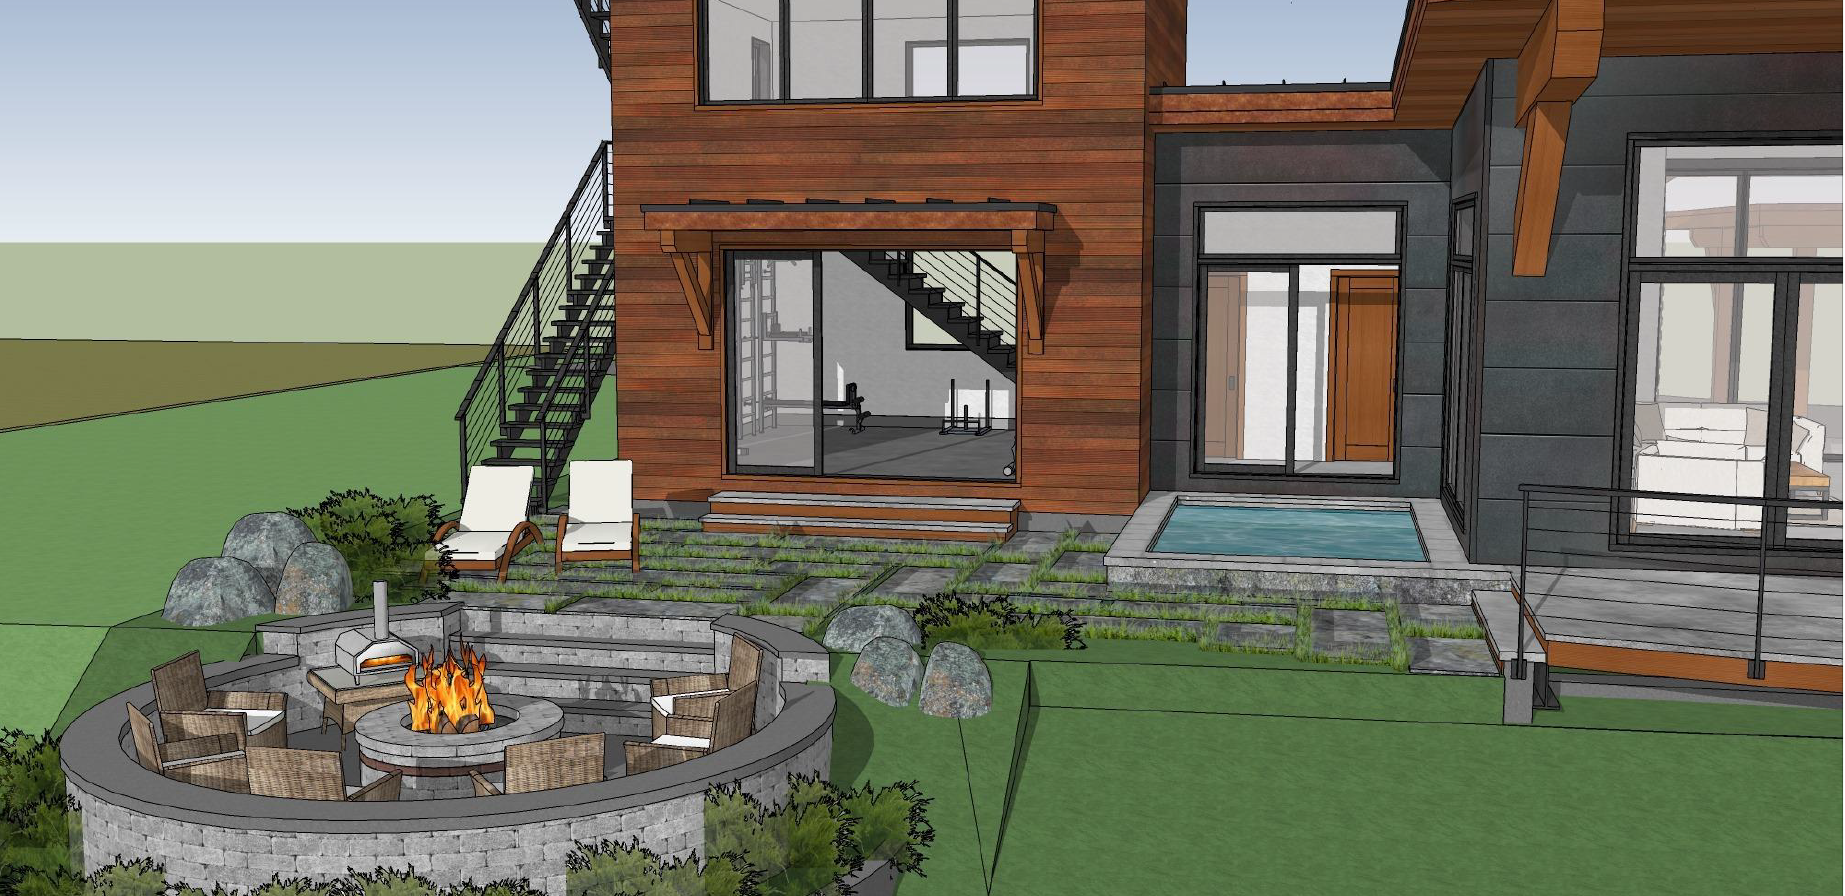 exterior design of the fire pit near the pool of a modern house